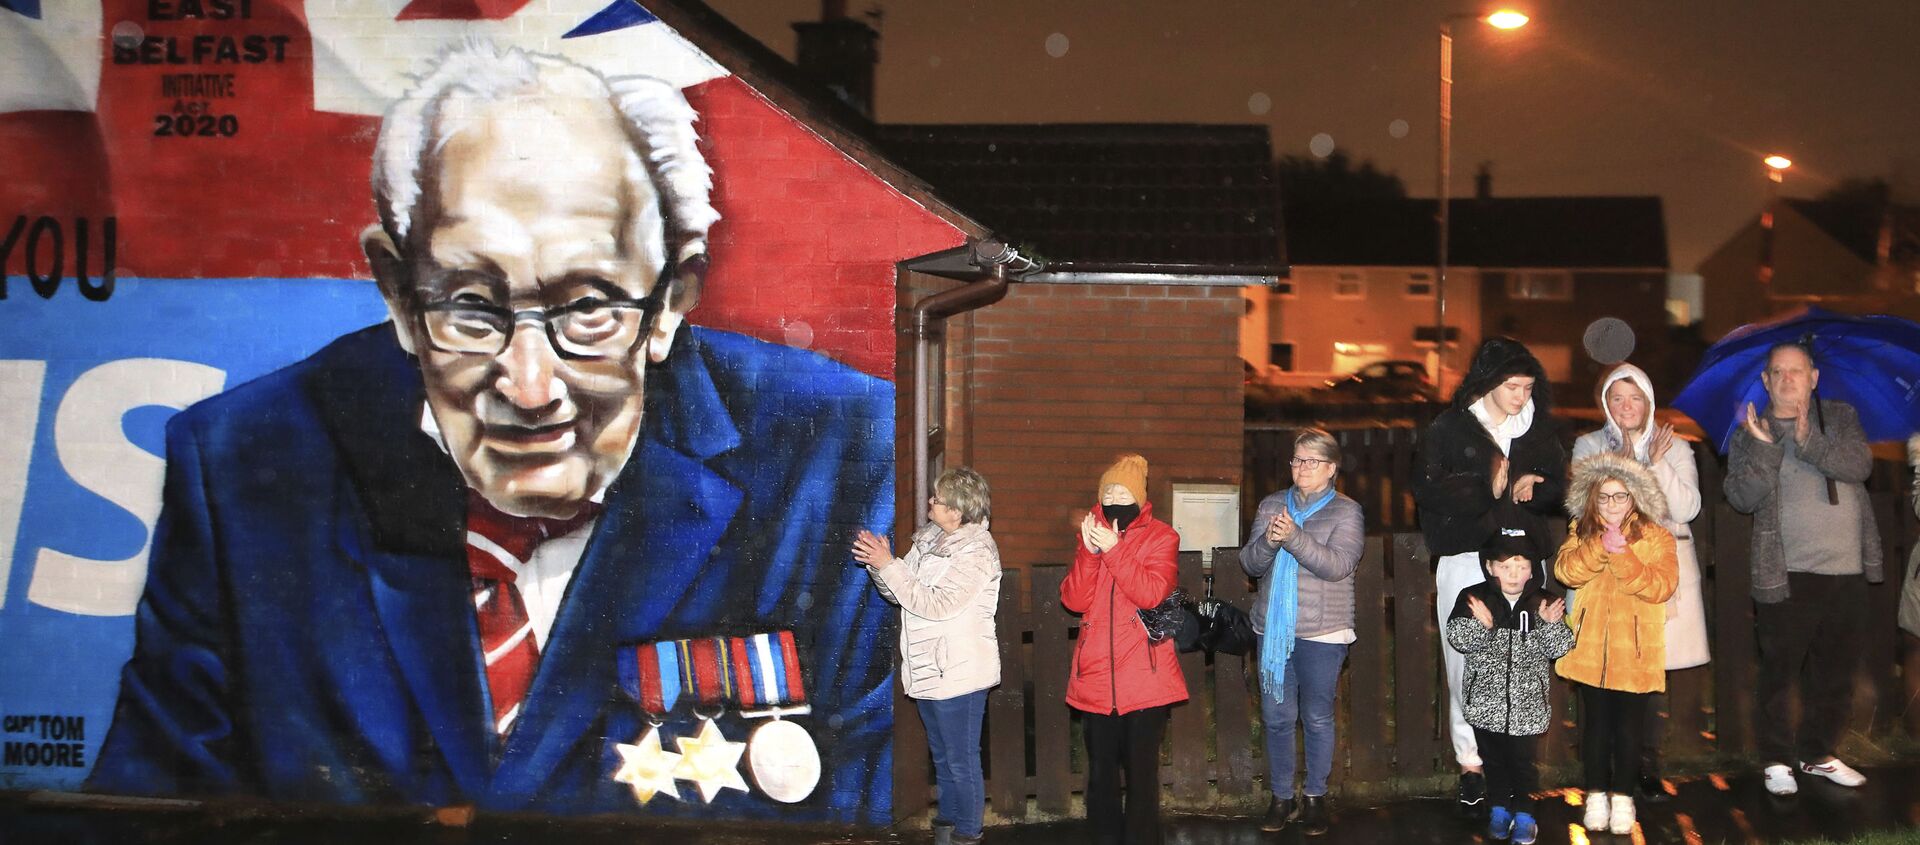 Local residents join a national clap beside a mural of Captain Sir Tom Moore in East Belfast, Northern Ireland, Wednesday, Feb. 3, 2021. Captain Moore passed away Tuesday after being treated with Covid-19 and was known for his achievements raising millions of pounds for the NHS charity during the Covid-19 pandemic.  - Sputnik International, 1920, 08.02.2021